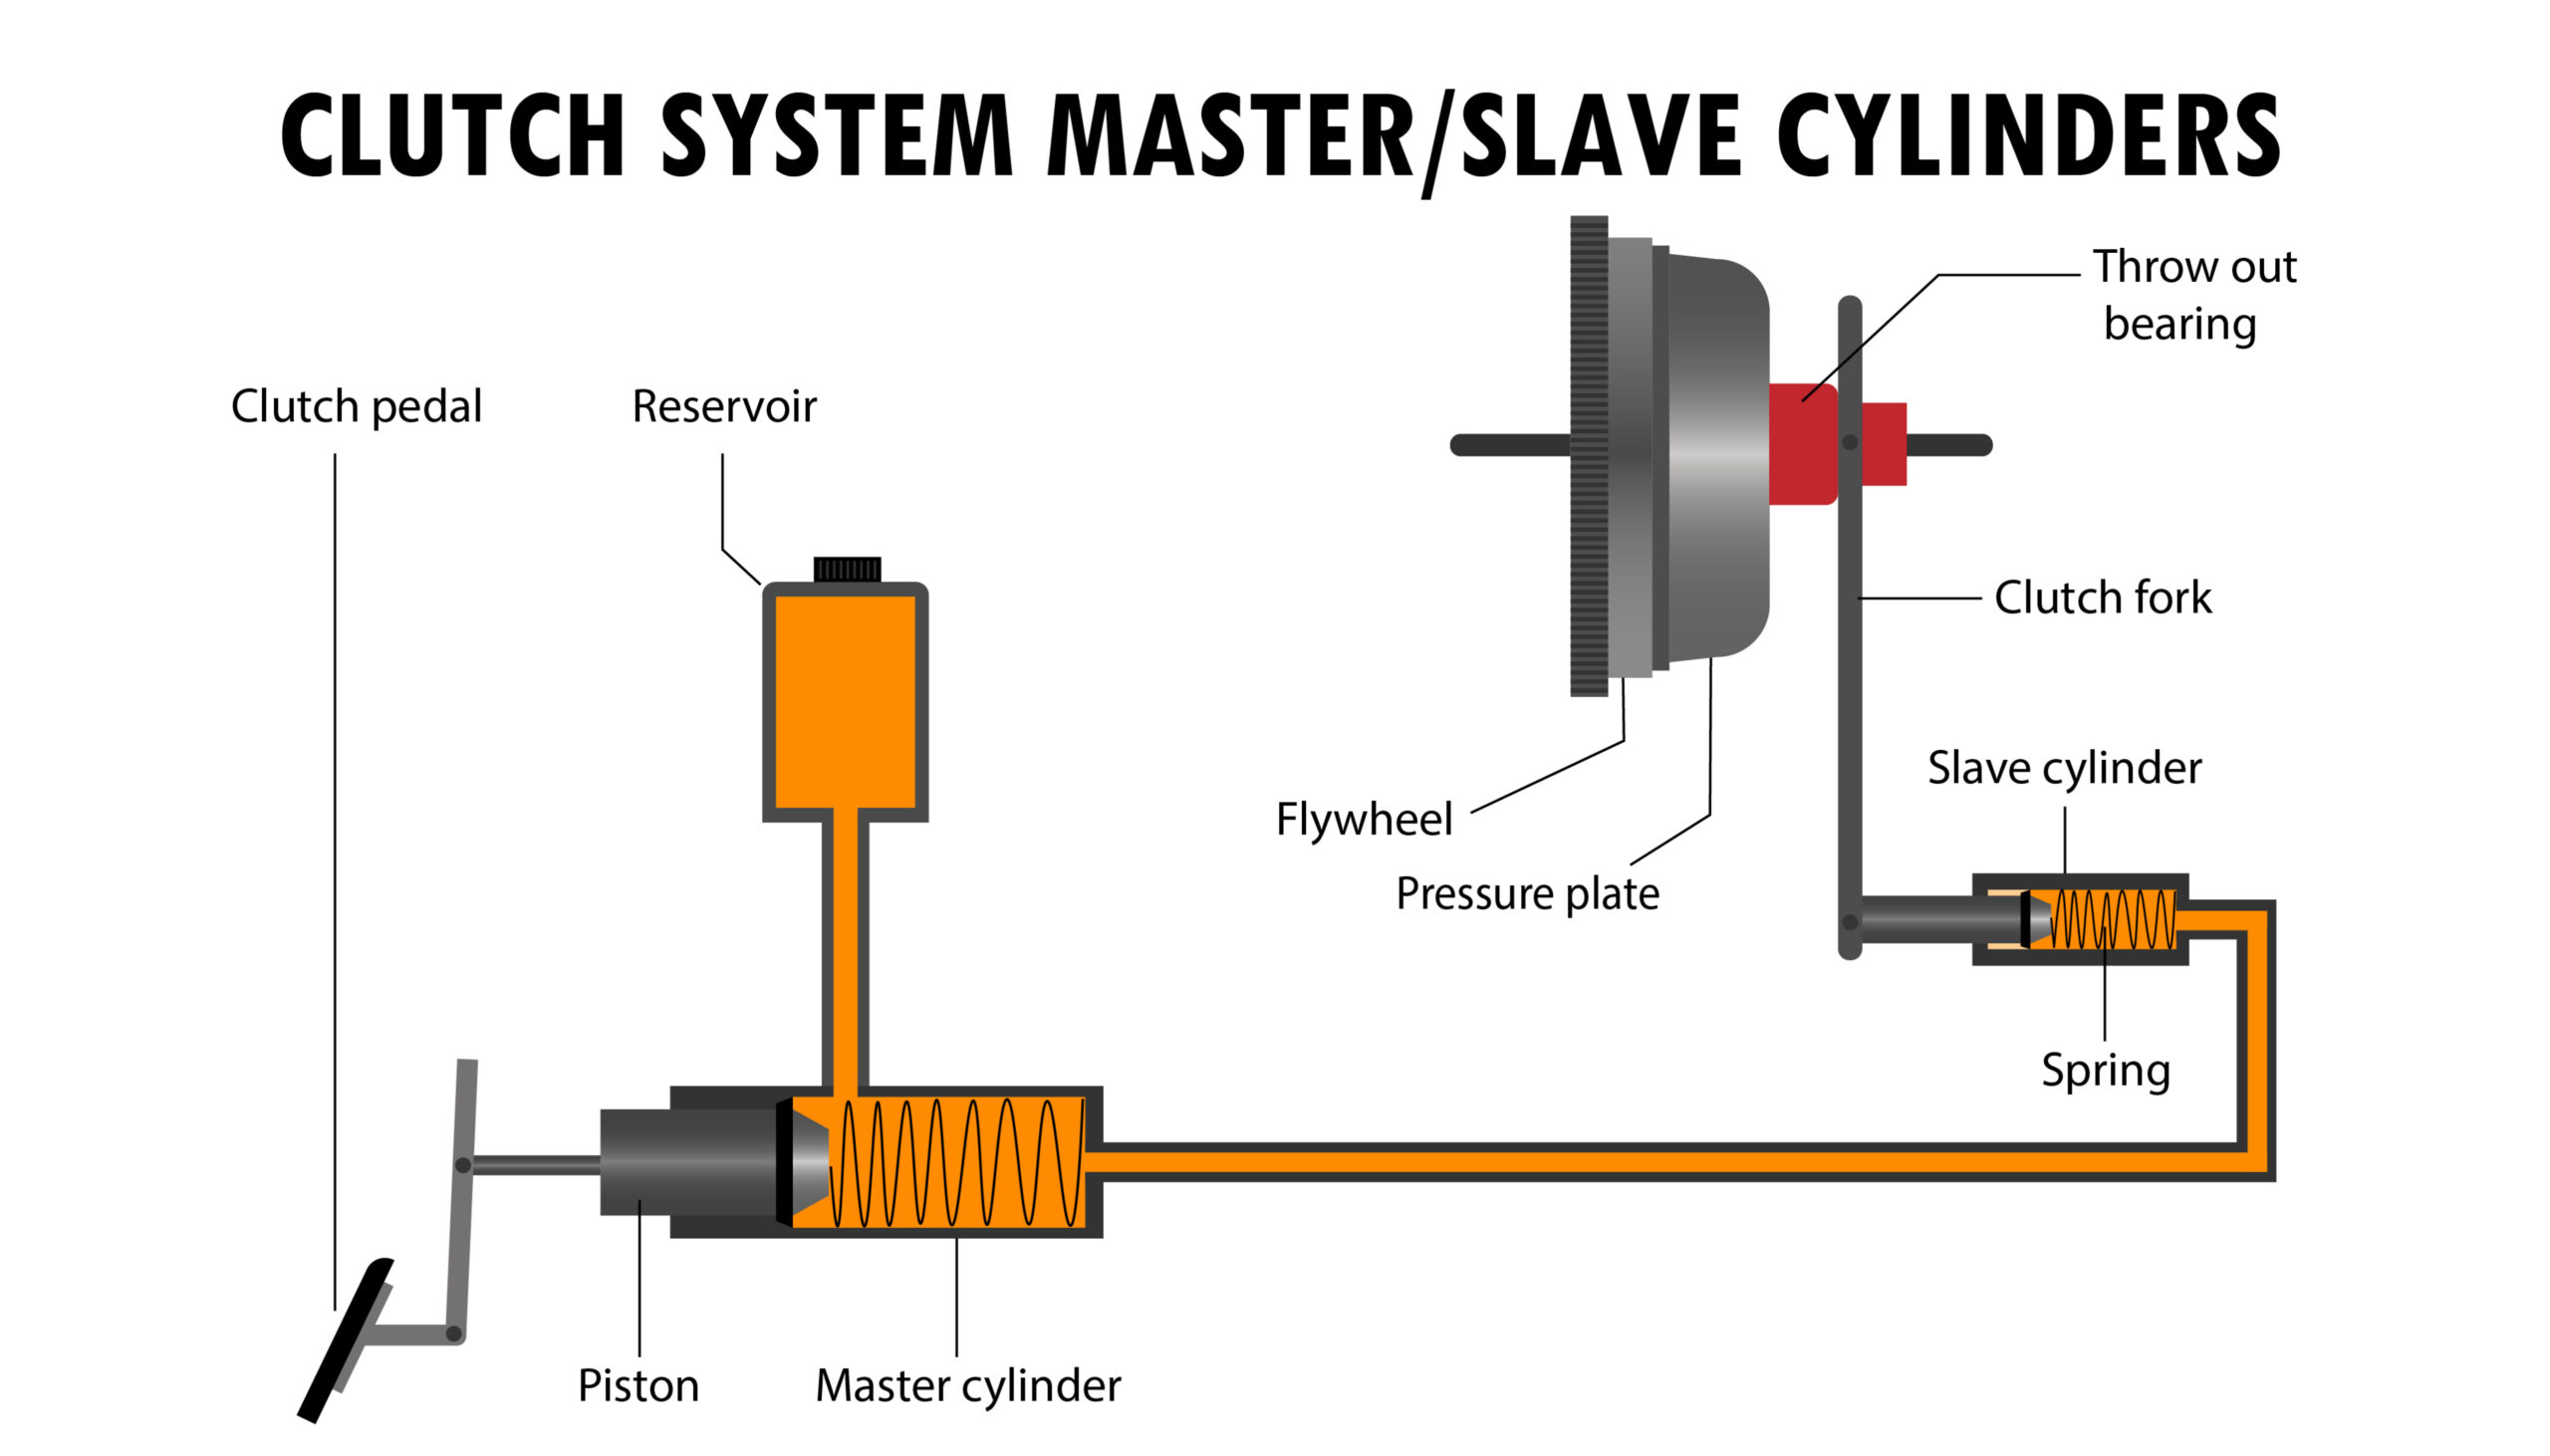 A diagram showing how a clutch system works. In the diagram, the clutch pedal is engaged/press,ed, which activates a piston that moves into the master cylinder. This action sends fluid from the reservoir above the cylinder to the slave cylinder. When the fluid reaches the slave cylinder, another piston is activated that moves the clutch fork against the throw our bearing, which is attached to the pressure plate. This action moves the flywheel. 